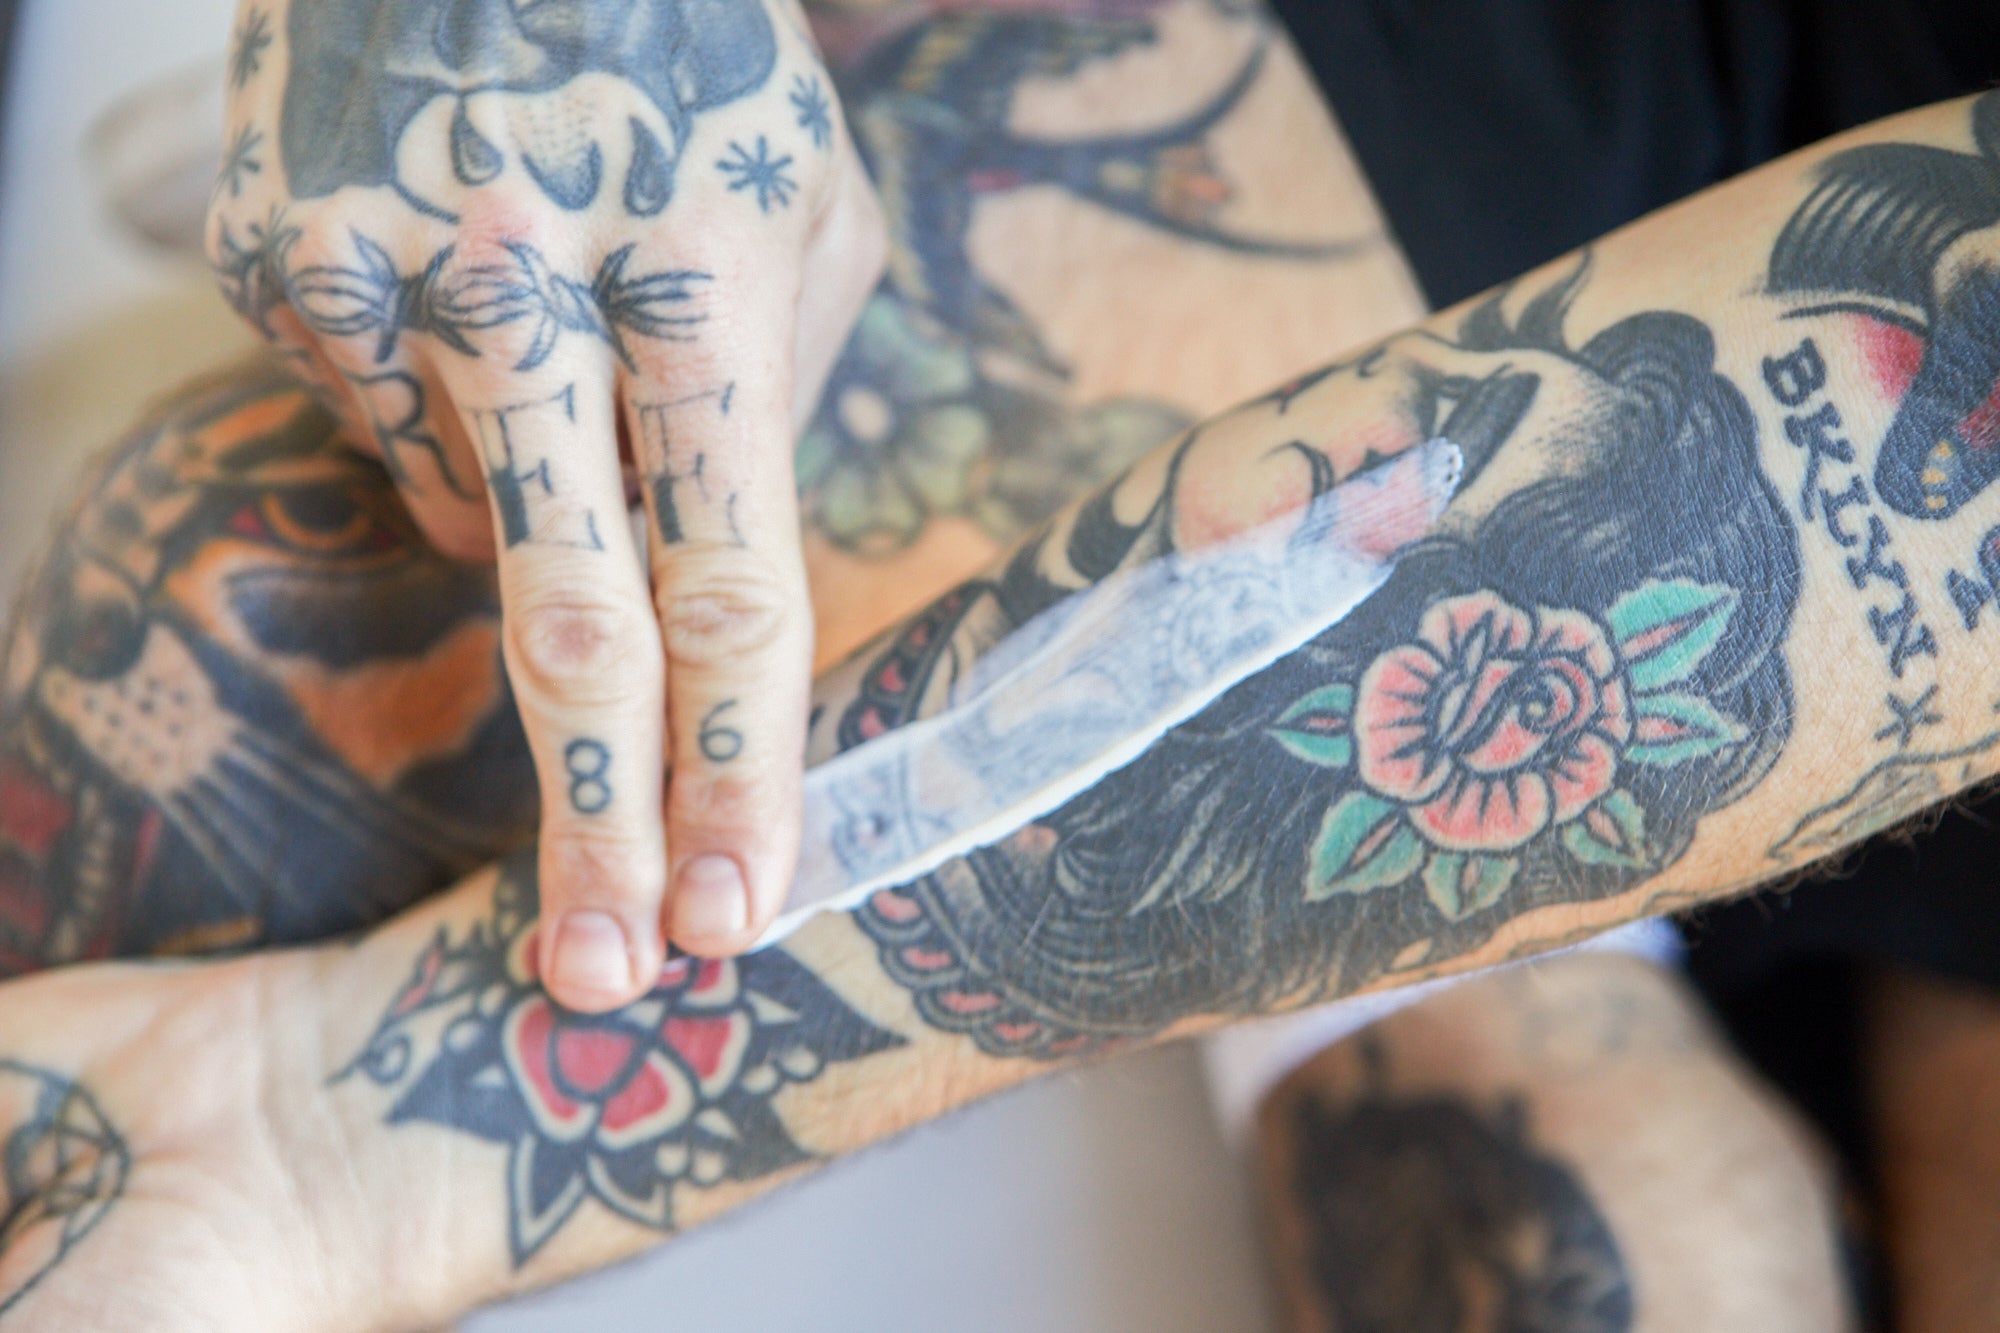 Tattoo needles leave more than just ink